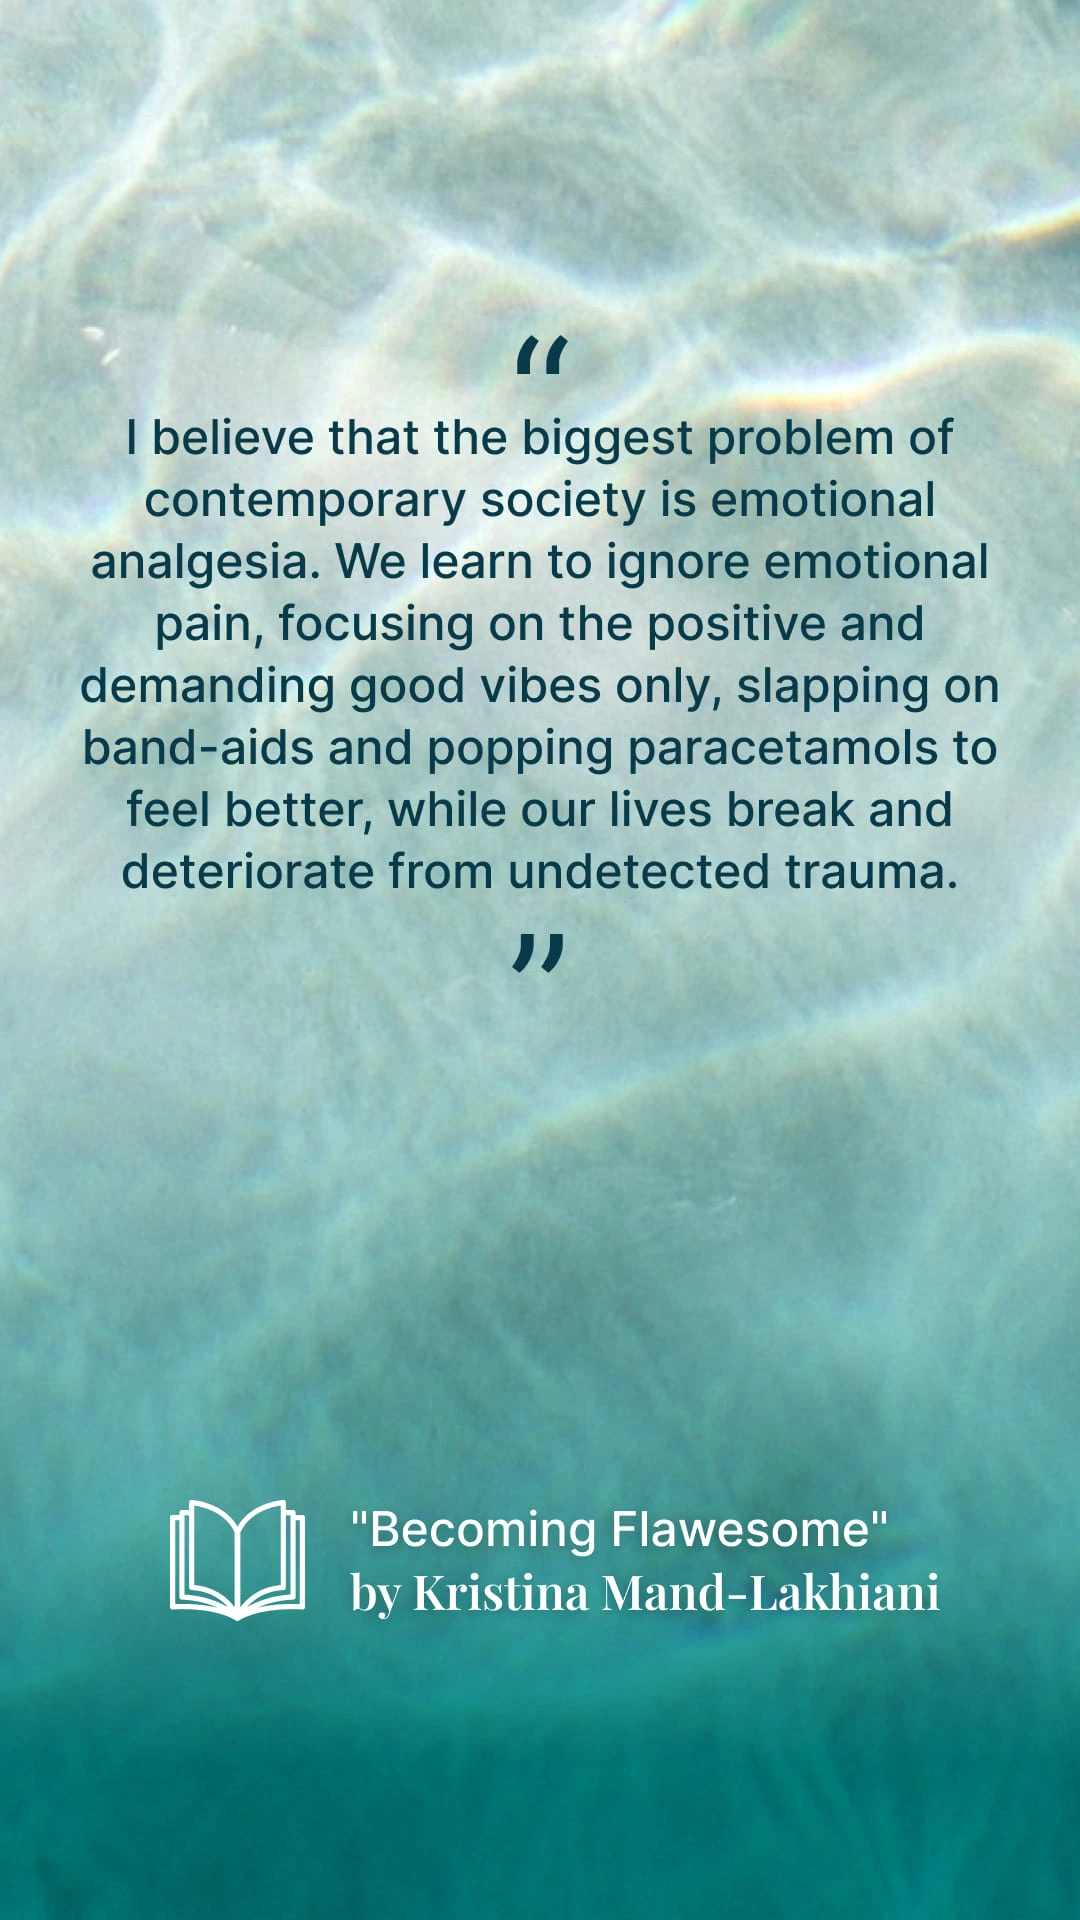 Kristina Mänd-Lakhiani quote about becoming emotionally resilient